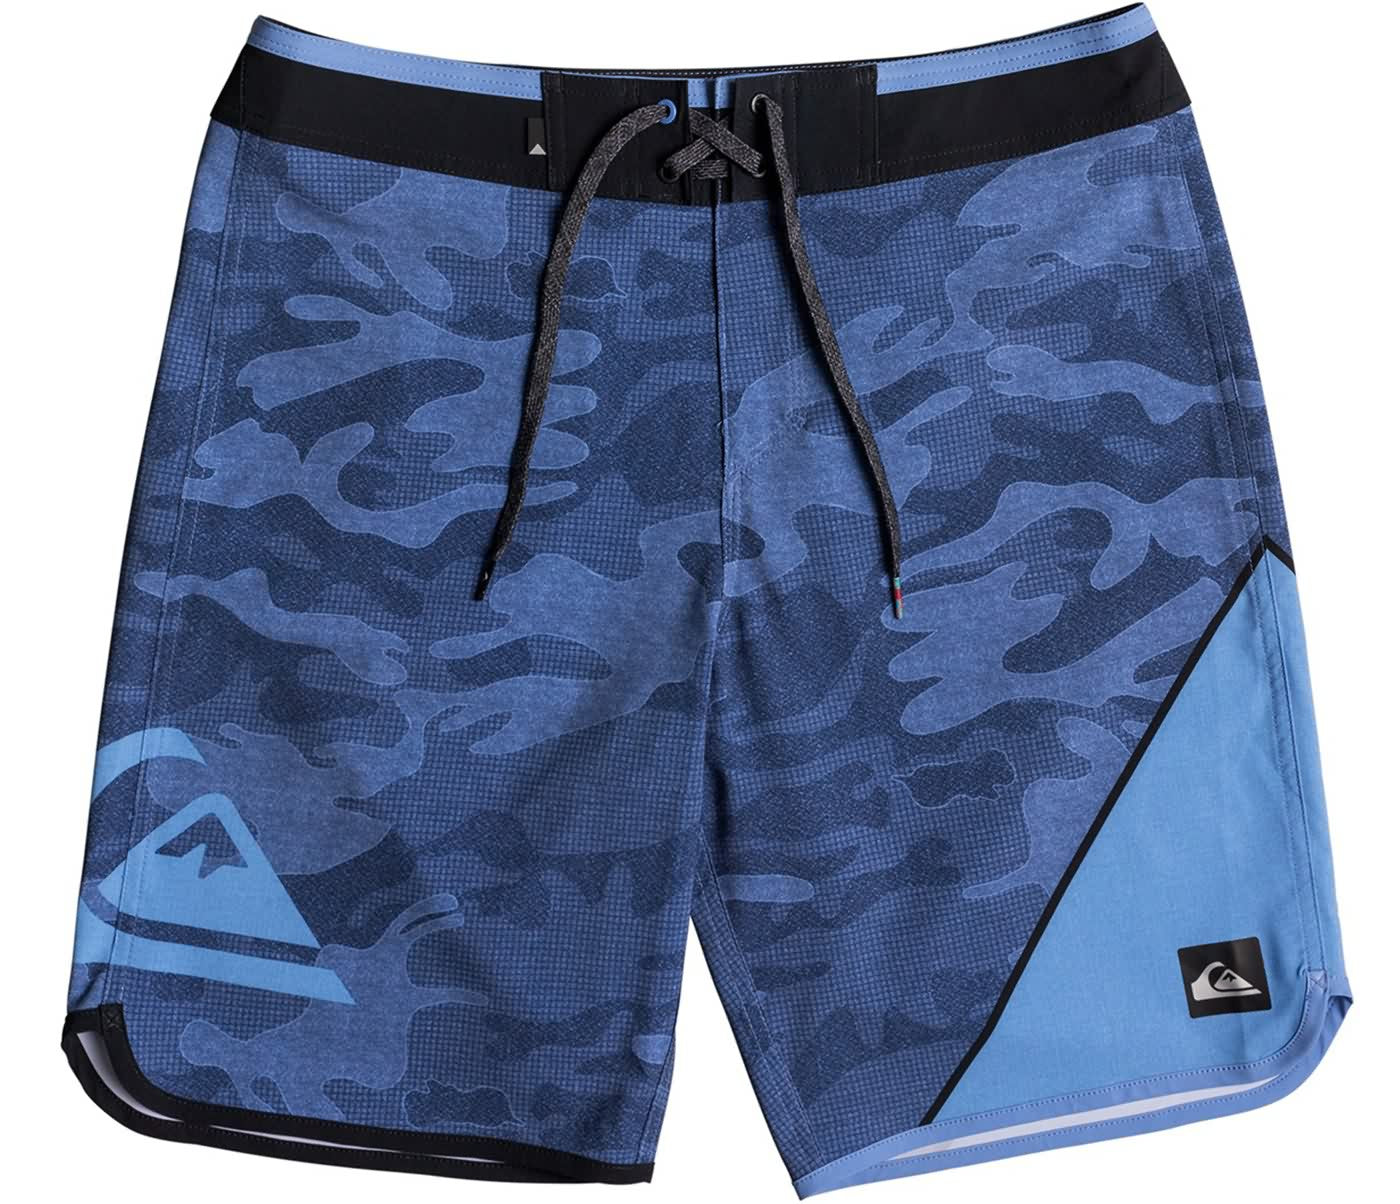 Quiksilver Surf Fall 2017 Mens Boardshorts Surfing Shorts Collection ...